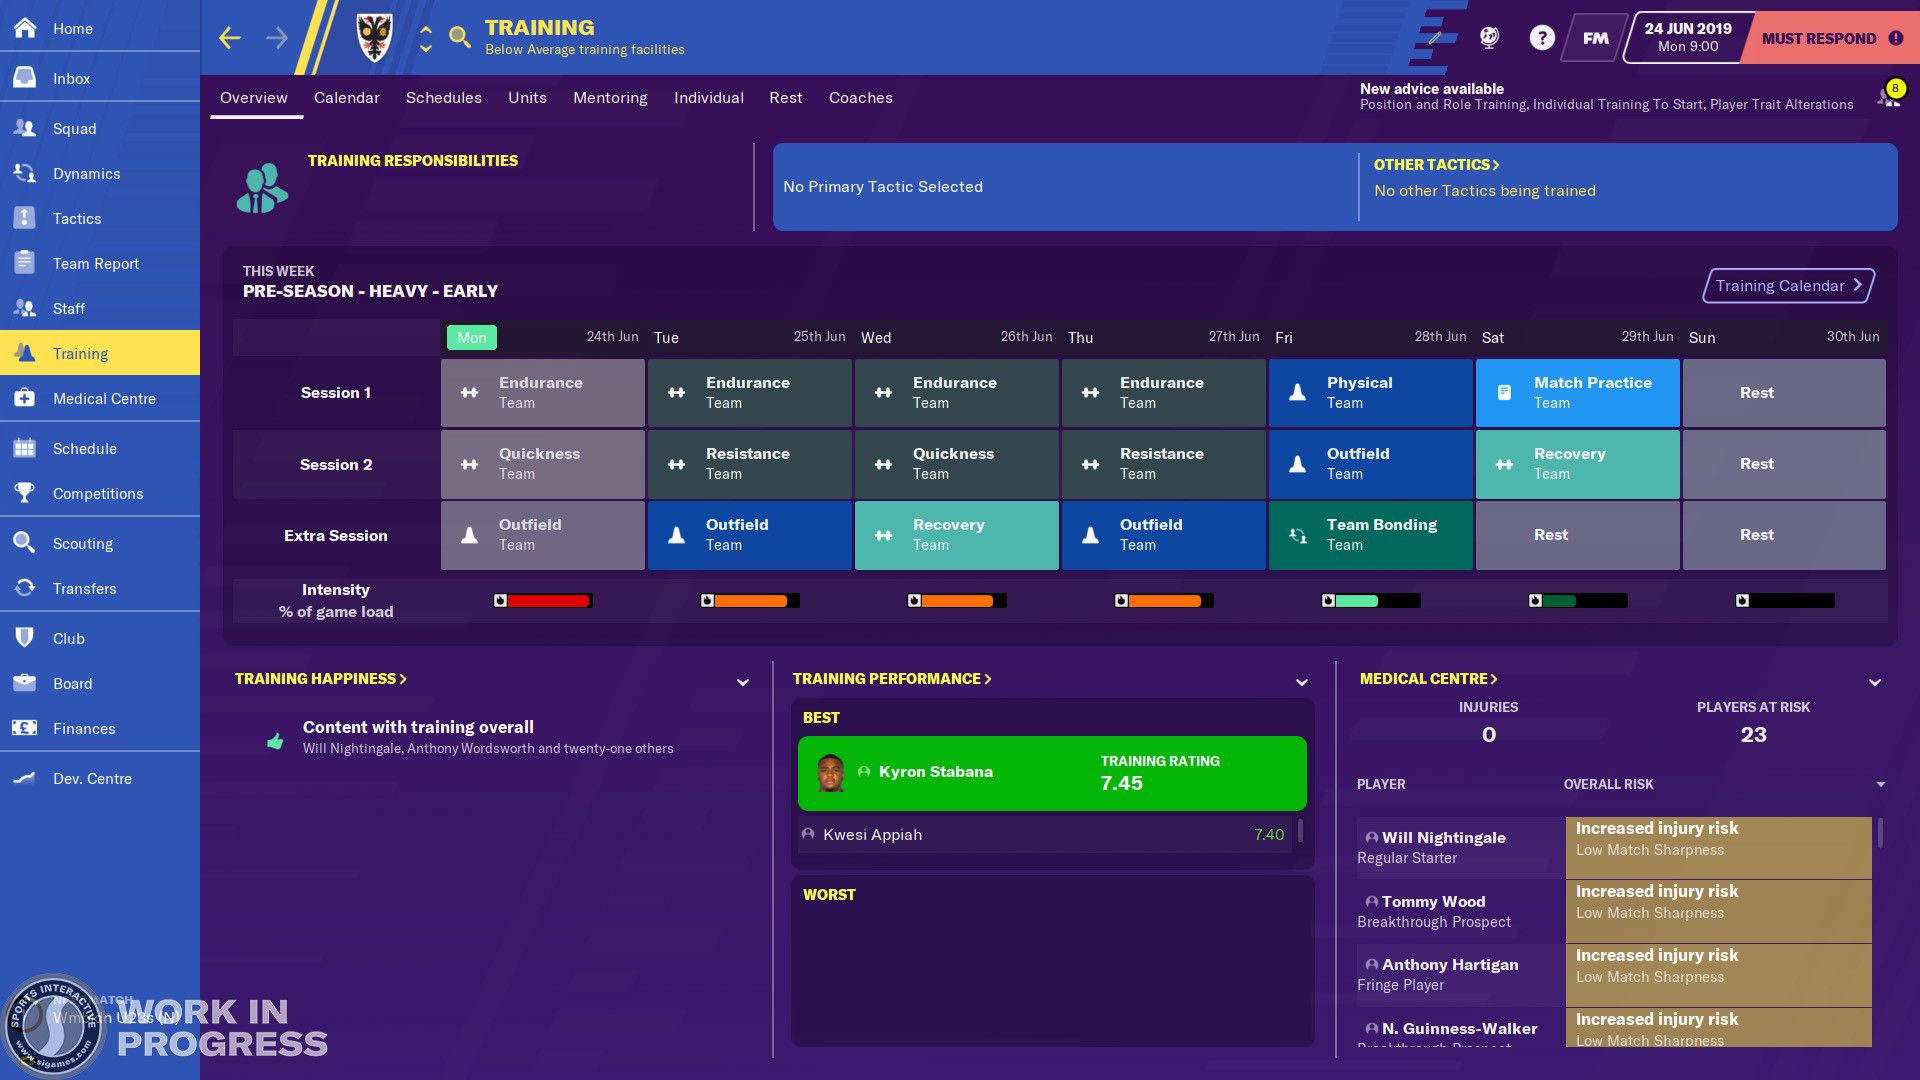 buy football manager 2020